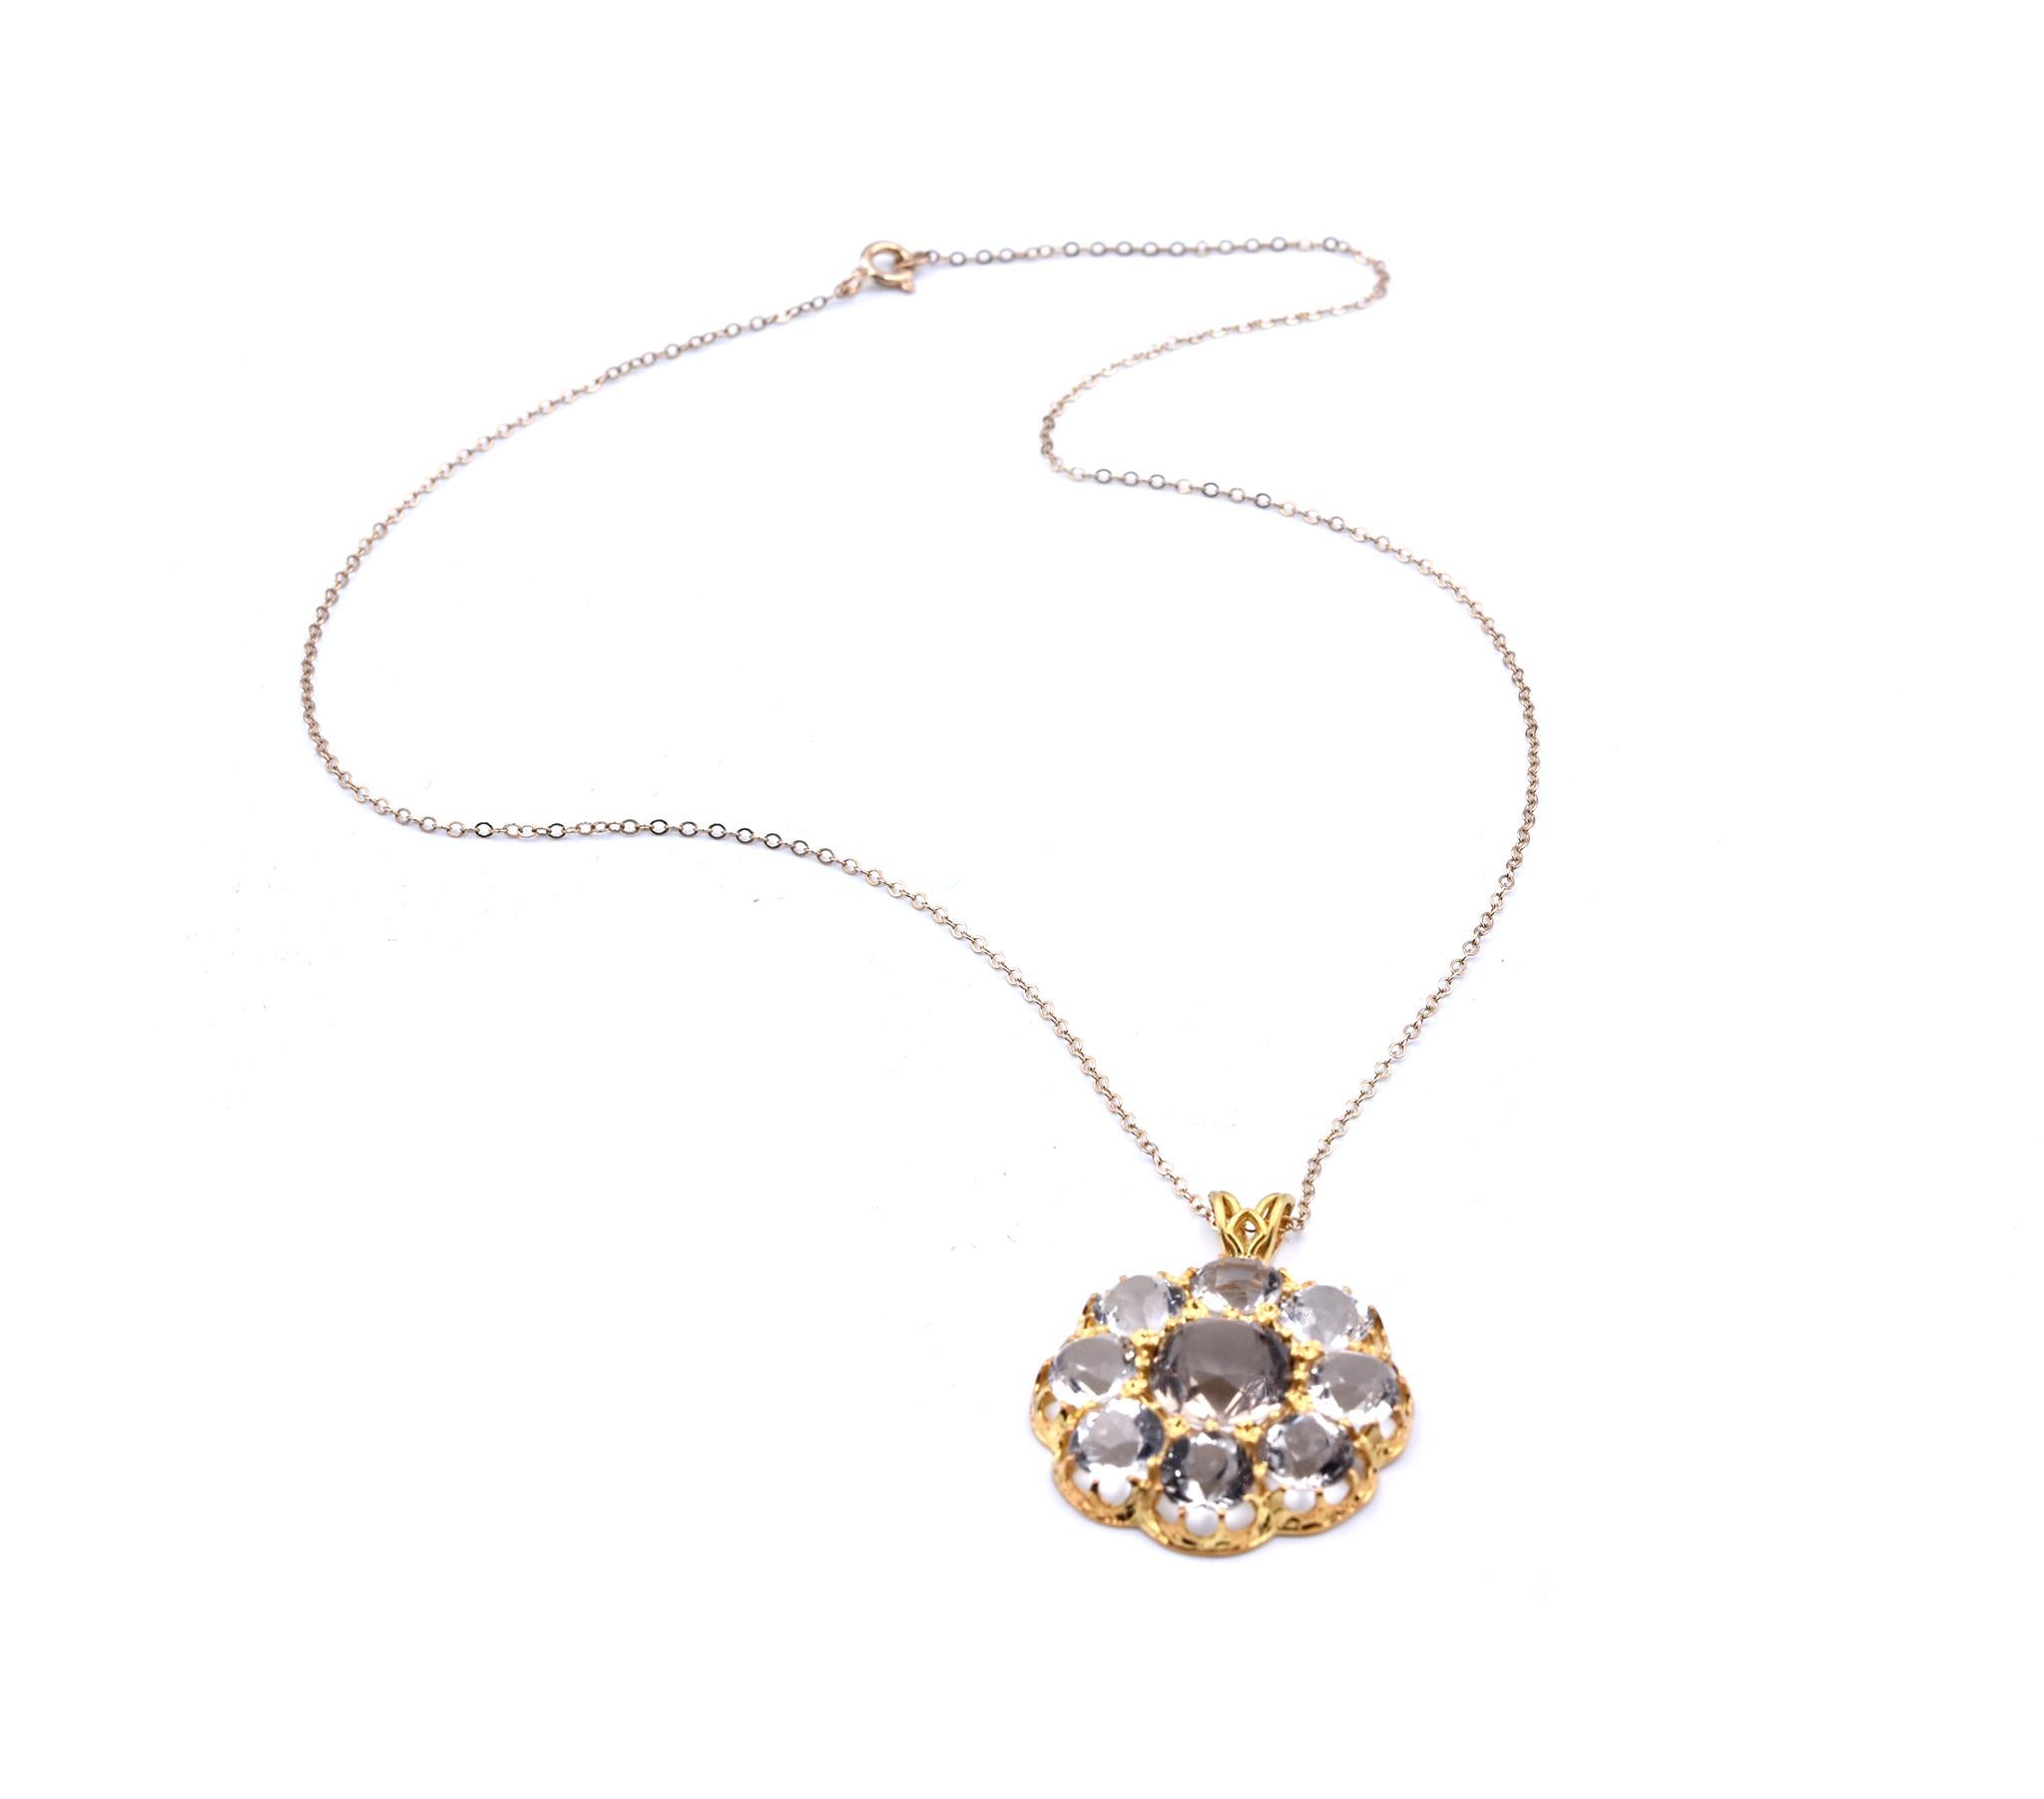 Designer: custom design
Material: 14k yellow gold
Dimensions: necklace is 18” in length, quartz pendant is 1 ¼-inches long with bail and has a diameter of 53mm
Weight: 7.11 grams
